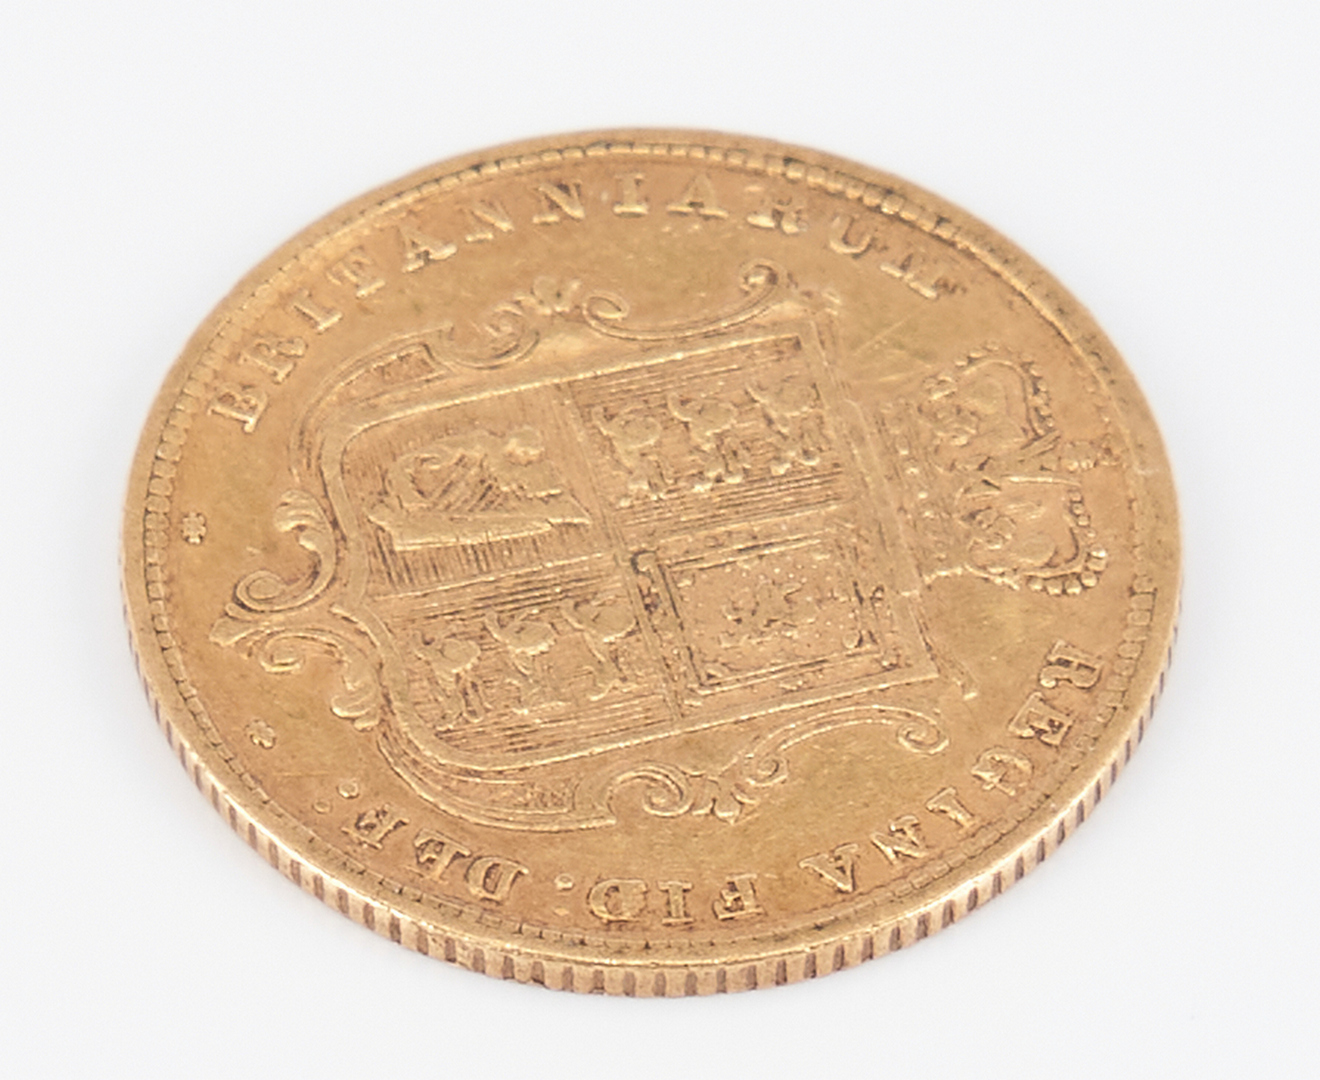 Lot 1165: 1883 London Mint Victoria 'Shield' Half Sovereign Gold Coin